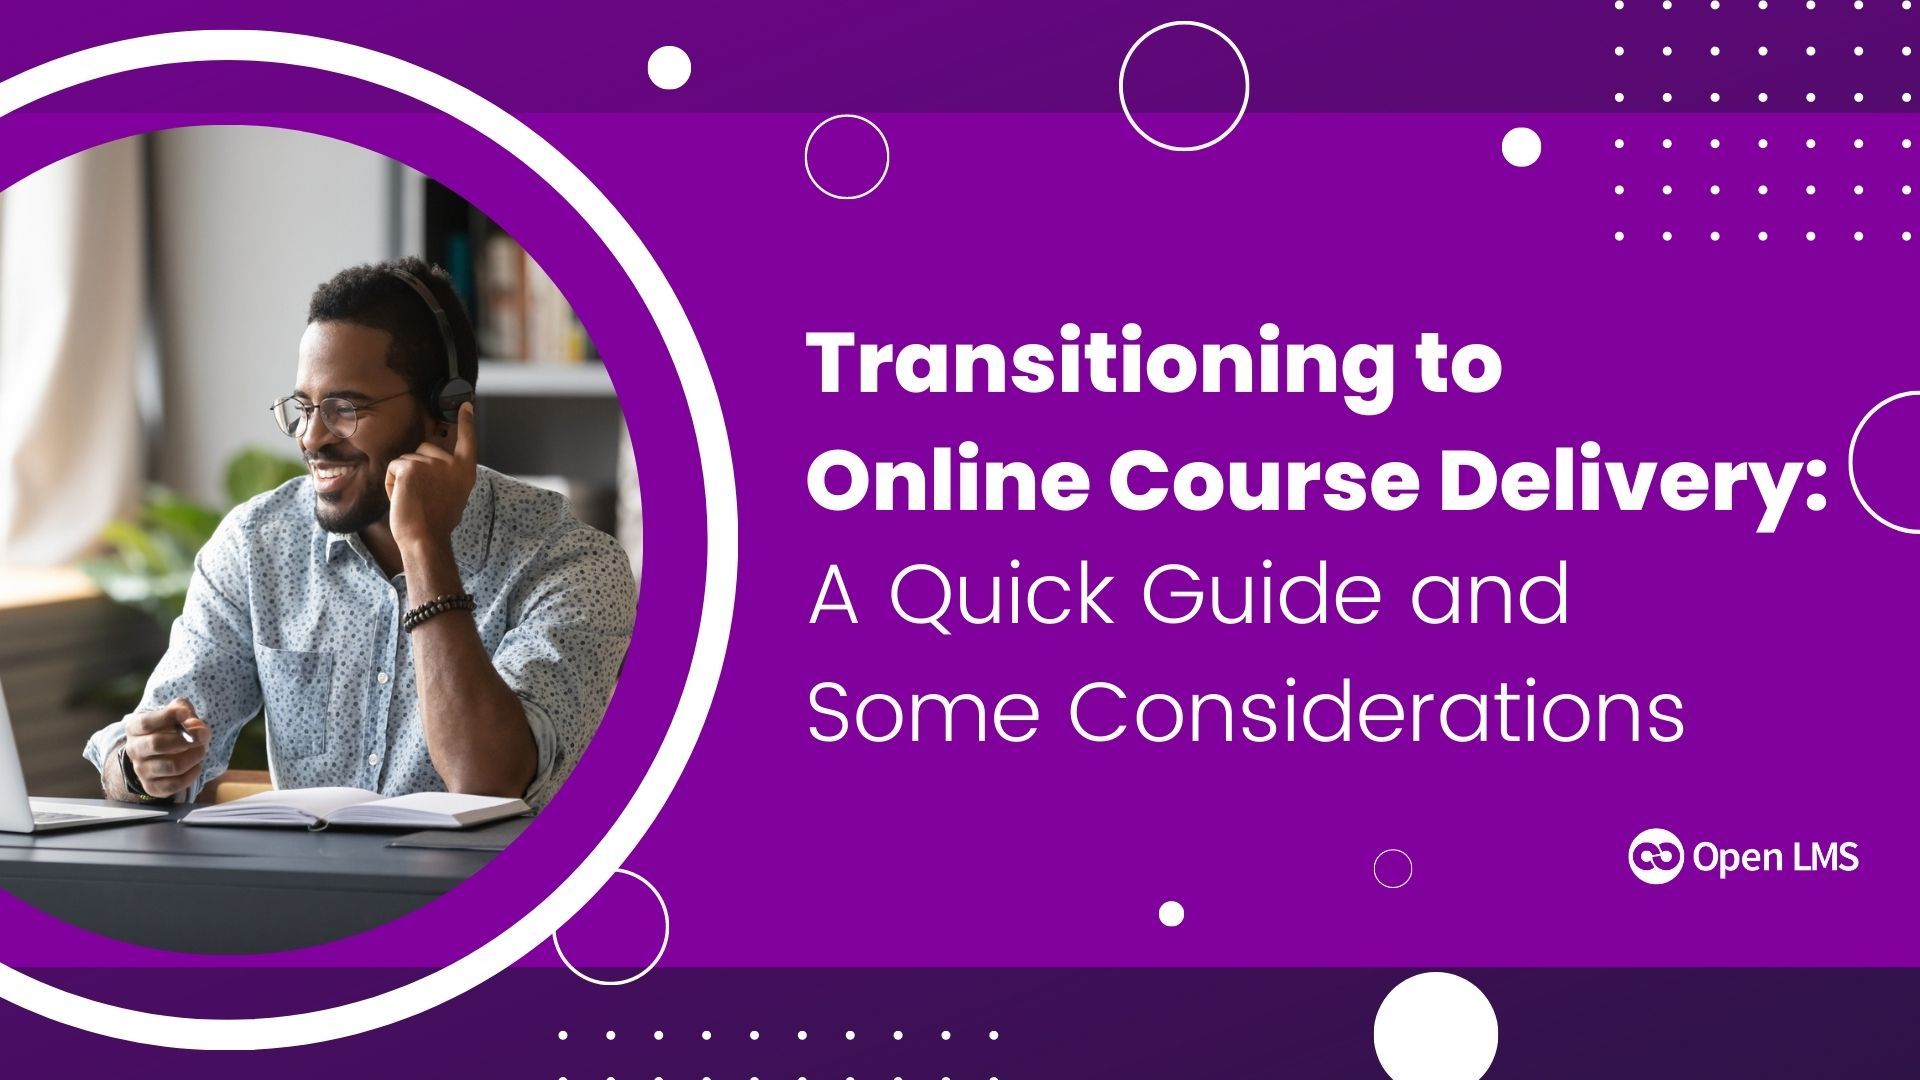 Transitioning to Online Course Delivery: A Quick Guide and Some Considerations